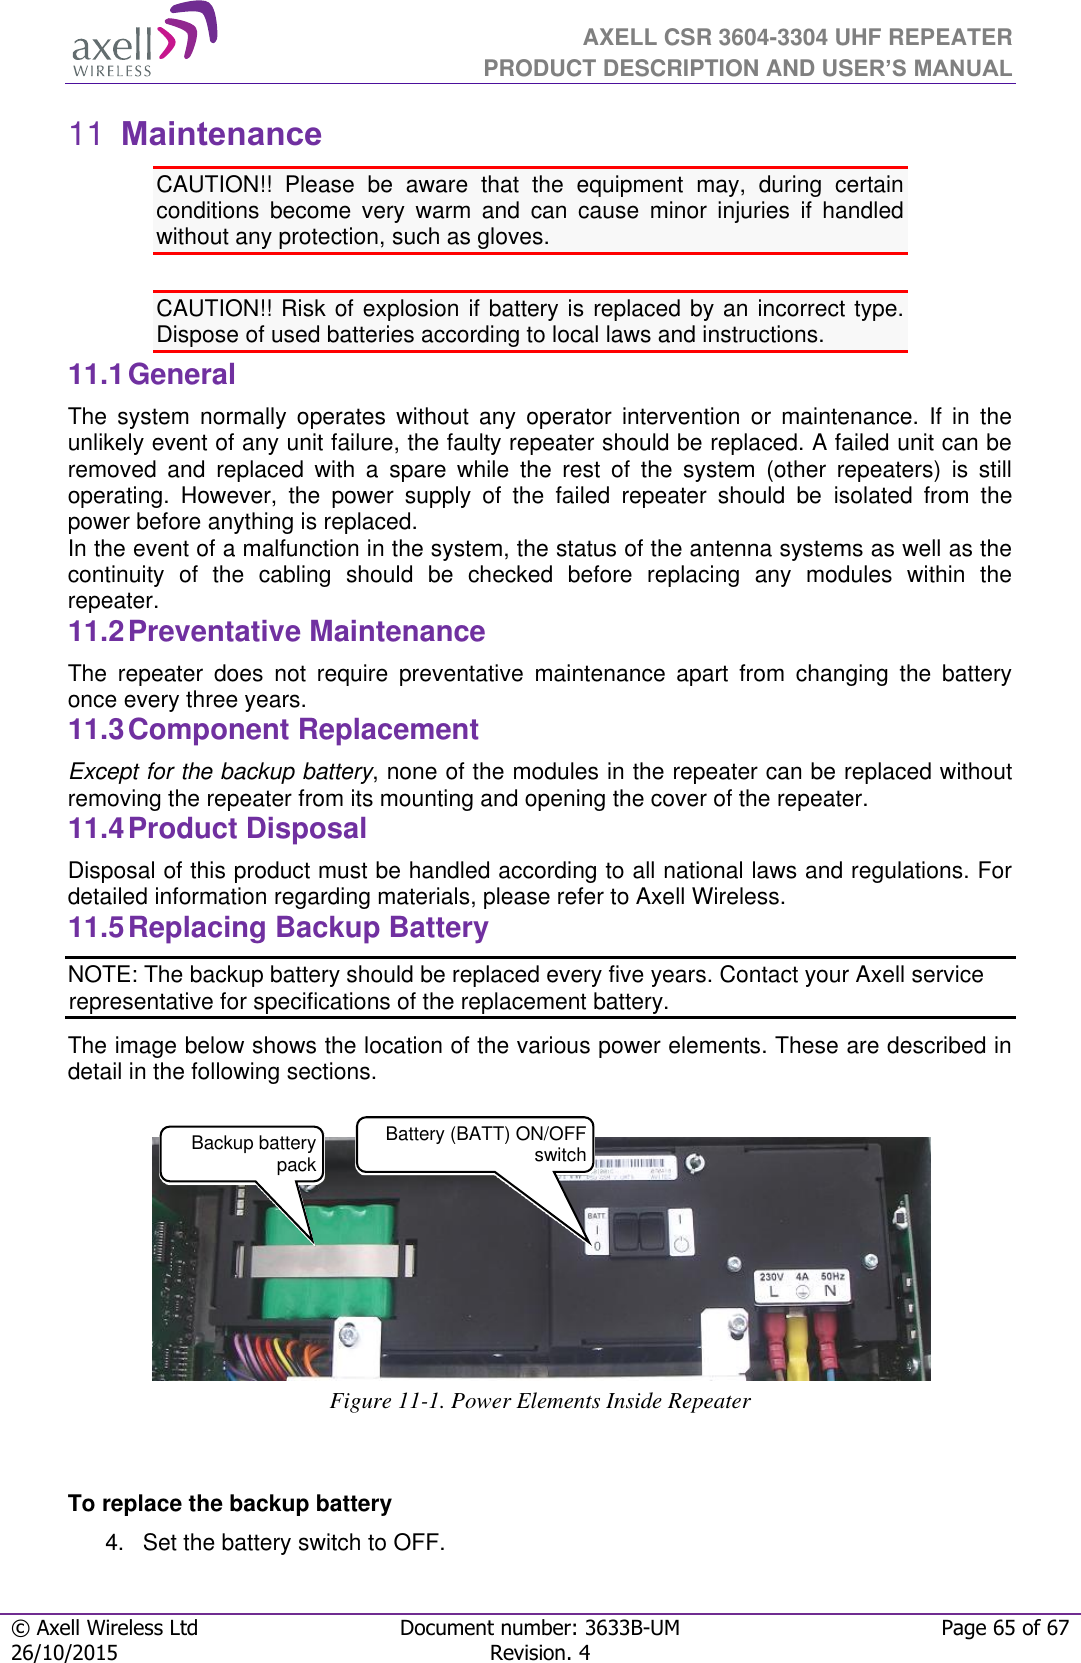  AXELL CSR 3604-3304 UHF REPEATER PRODUCT DESCRIPTION AND USER’S MANUAL  © Axell Wireless Ltd Document number: 3633B-UM Page 65 of 67 26/10/2015 Revision. 4    Maintenance 11CAUTION!!  Please  be  aware  that  the  equipment  may,  during  certain conditions  become  very  warm  and  can  cause  minor  injuries  if  handled without any protection, such as gloves.  CAUTION!! Risk of explosion if battery is replaced by an incorrect type.  Dispose of used batteries according to local laws and instructions. 11.1 General The  system  normally  operates  without  any  operator  intervention  or  maintenance.  If  in  the unlikely event of any unit failure, the faulty repeater should be replaced. A failed unit can be removed  and  replaced  with  a  spare  while  the  rest  of  the  system  (other  repeaters)  is  still operating.  However,  the  power  supply  of  the  failed  repeater  should  be  isolated  from  the power before anything is replaced. In the event of a malfunction in the system, the status of the antenna systems as well as the continuity  of  the  cabling  should  be  checked  before  replacing  any  modules  within  the repeater. 11.2 Preventative Maintenance The  repeater  does  not  require  preventative  maintenance  apart  from  changing  the  battery once every three years. 11.3 Component Replacement Except for the backup battery, none of the modules in the repeater can be replaced without removing the repeater from its mounting and opening the cover of the repeater.  11.4 Product Disposal Disposal of this product must be handled according to all national laws and regulations. For detailed information regarding materials, please refer to Axell Wireless. 11.5 Replacing Backup Battery NOTE: The backup battery should be replaced every five years. Contact your Axell service representative for specifications of the replacement battery. The image below shows the location of the various power elements. These are described in detail in the following sections.     Figure 11-1. Power Elements Inside Repeater  To replace the backup battery 4.  Set the battery switch to OFF. Backup battery pack  Battery (BATT) ON/OFF switch 